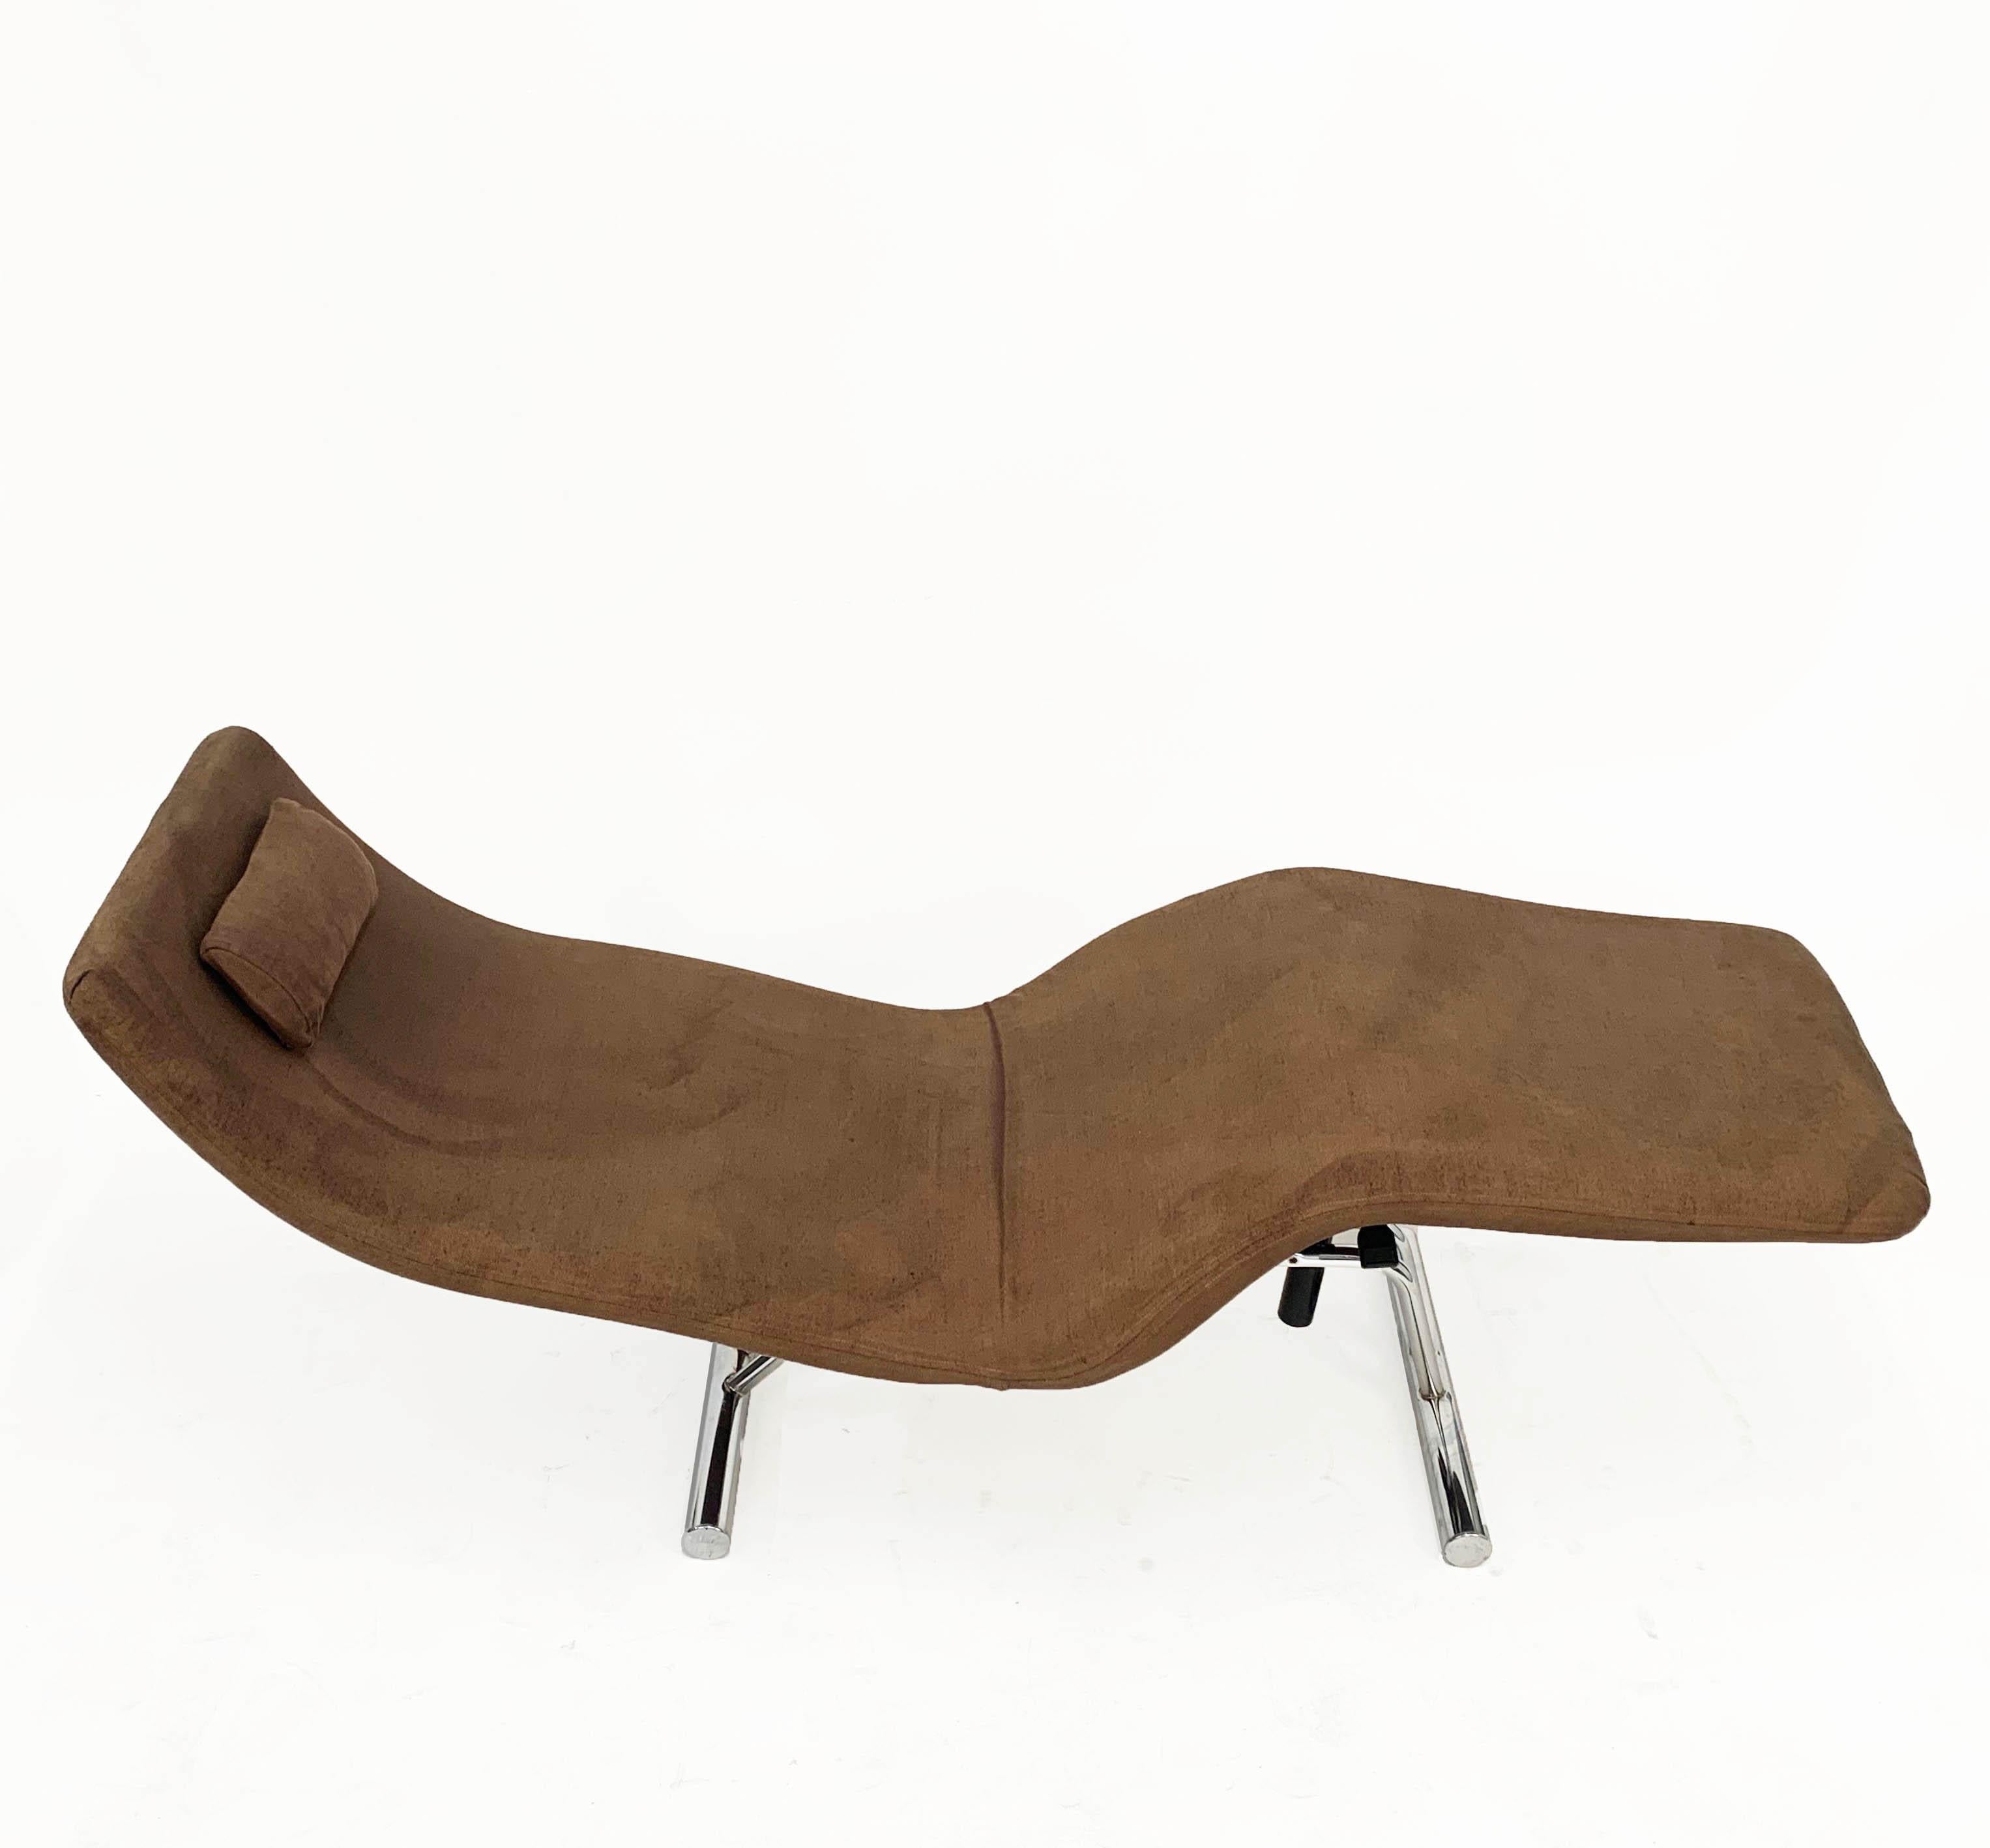 Midcentury Brown Fabric and Chrome Steel Chaise Longue, Paul Tuttle Style, 1980s For Sale 3